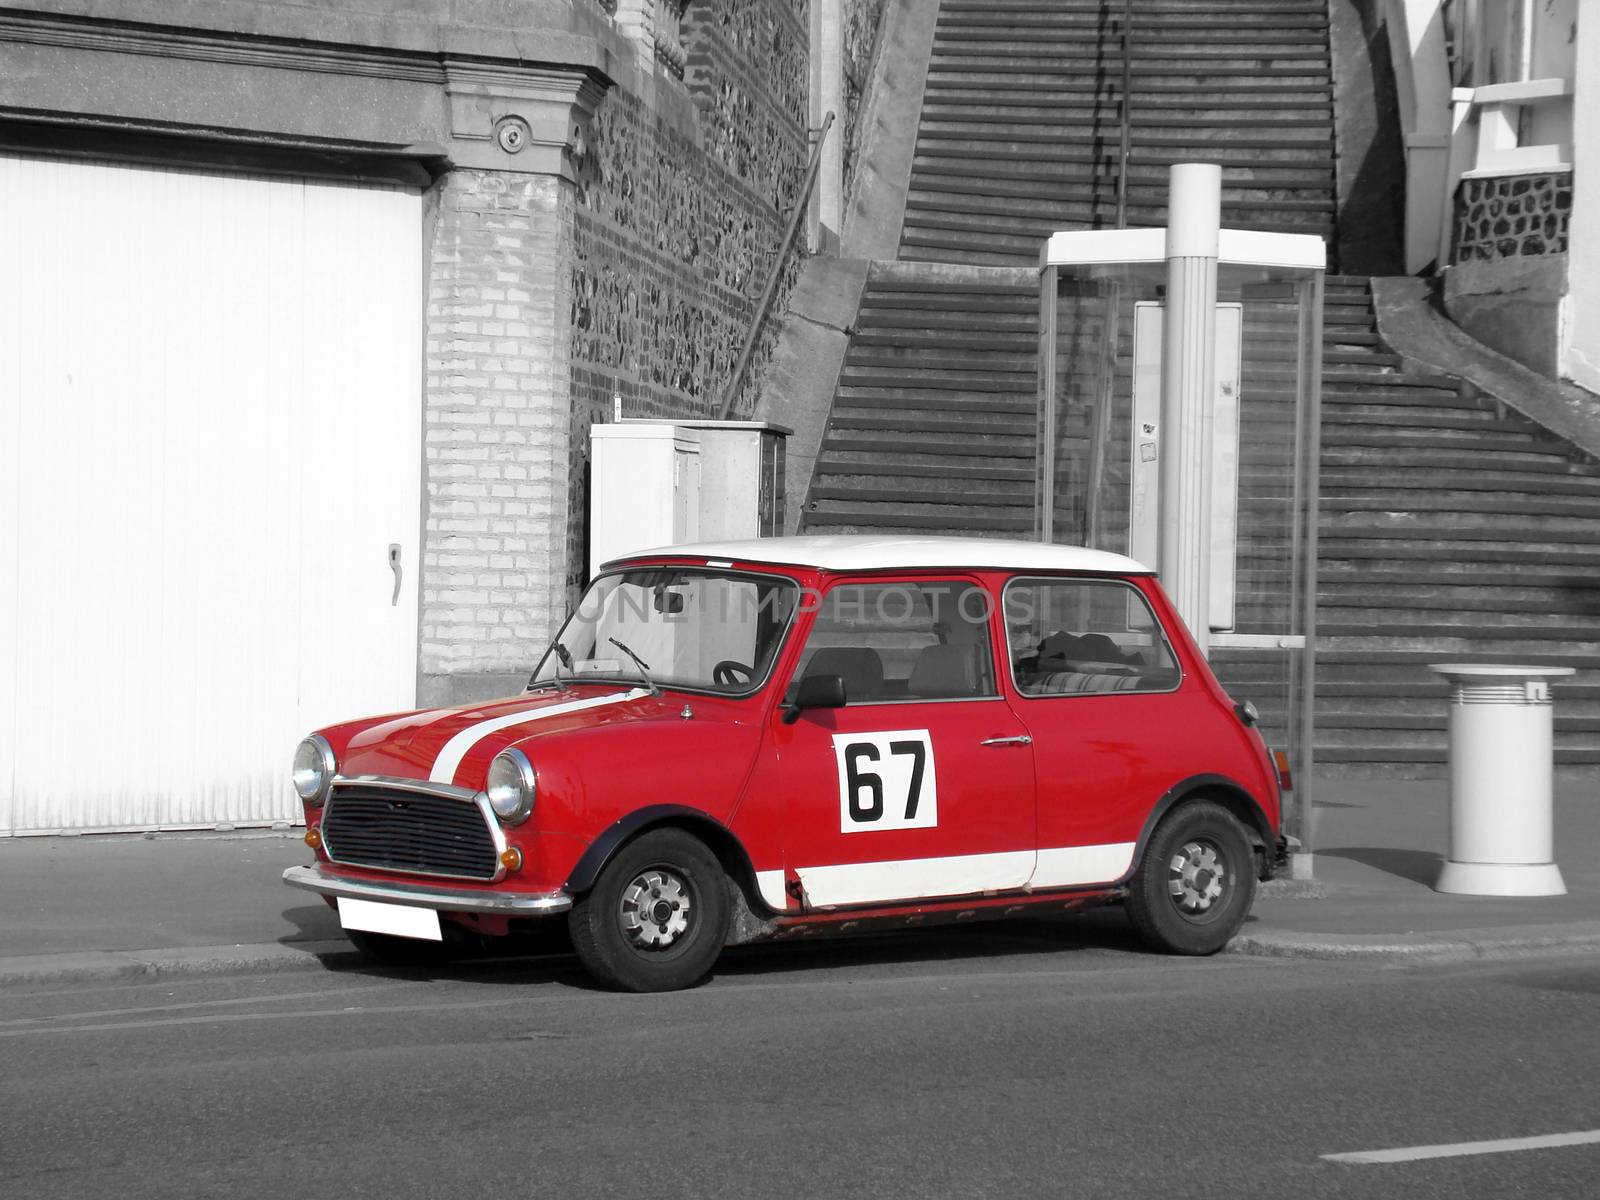 Red Retro Car Parked on the Street. Black and White picture